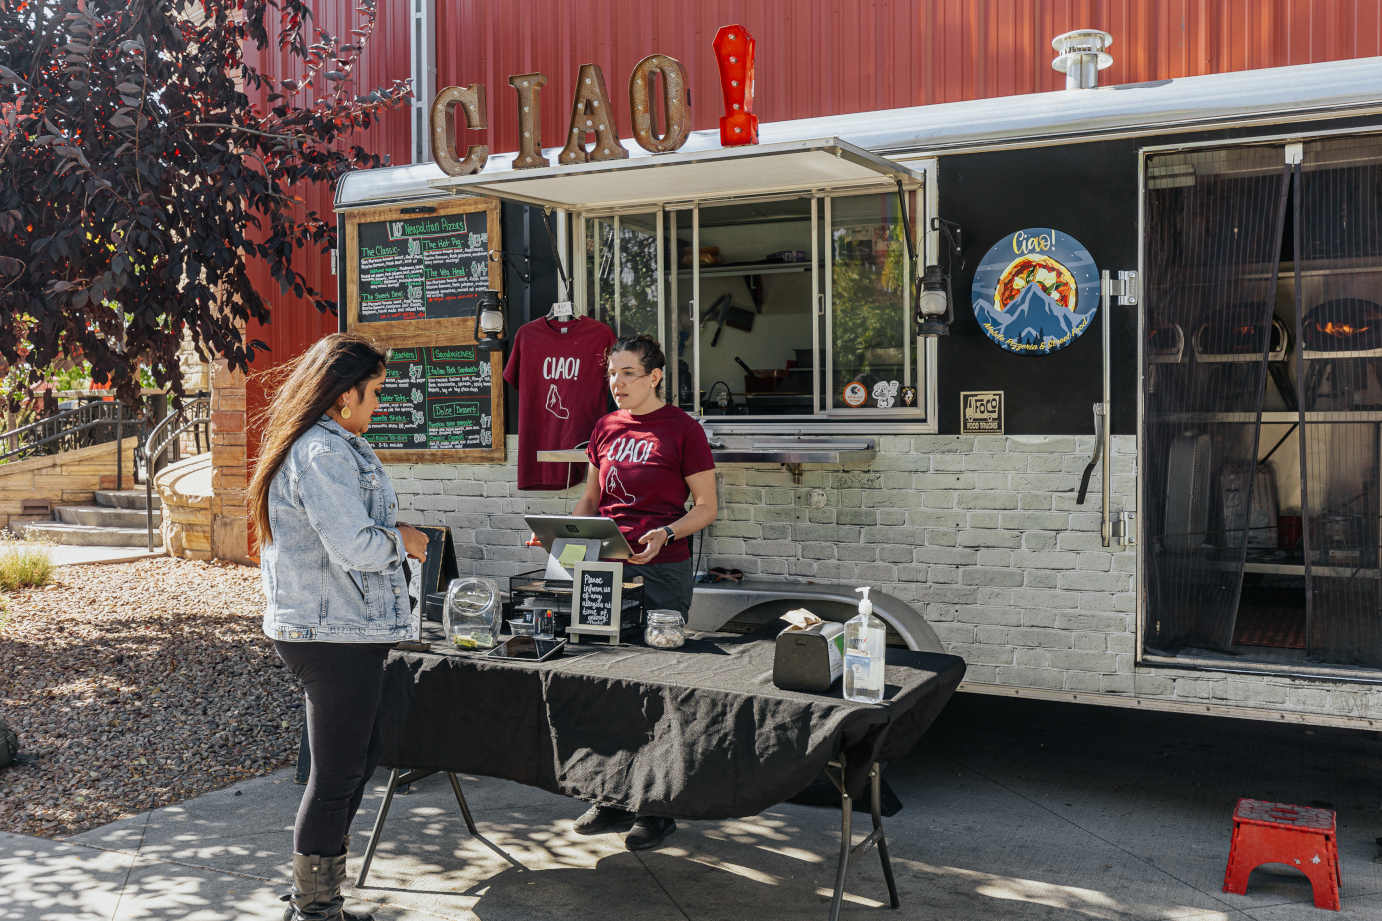 Employee and customer in front of food truck